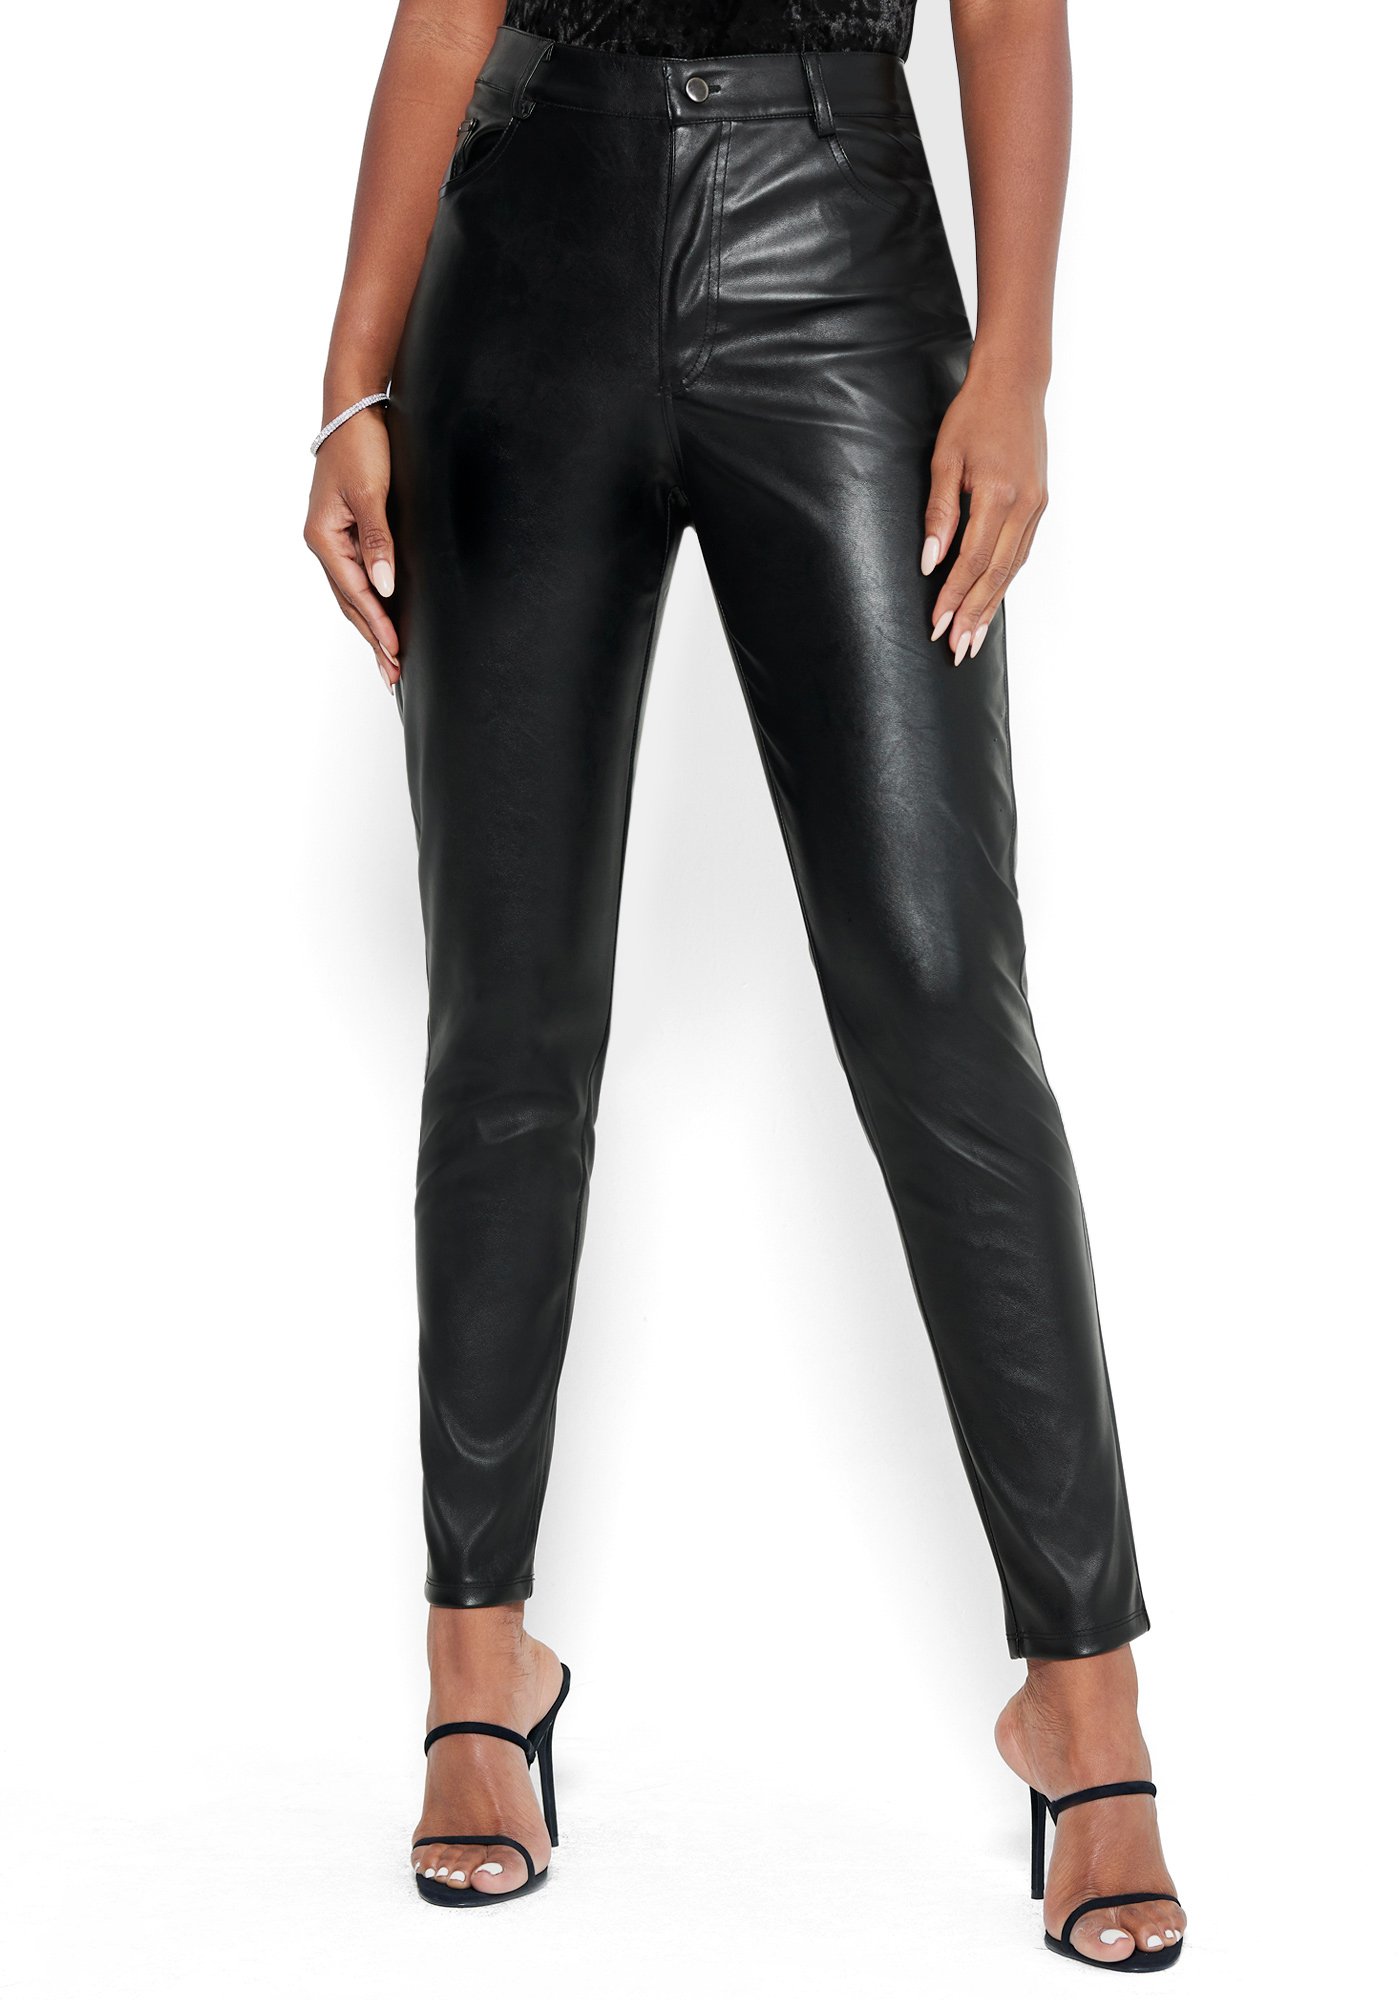 Bebe Women's Faux Leather Pant, Size 10 in Black Polyurethane